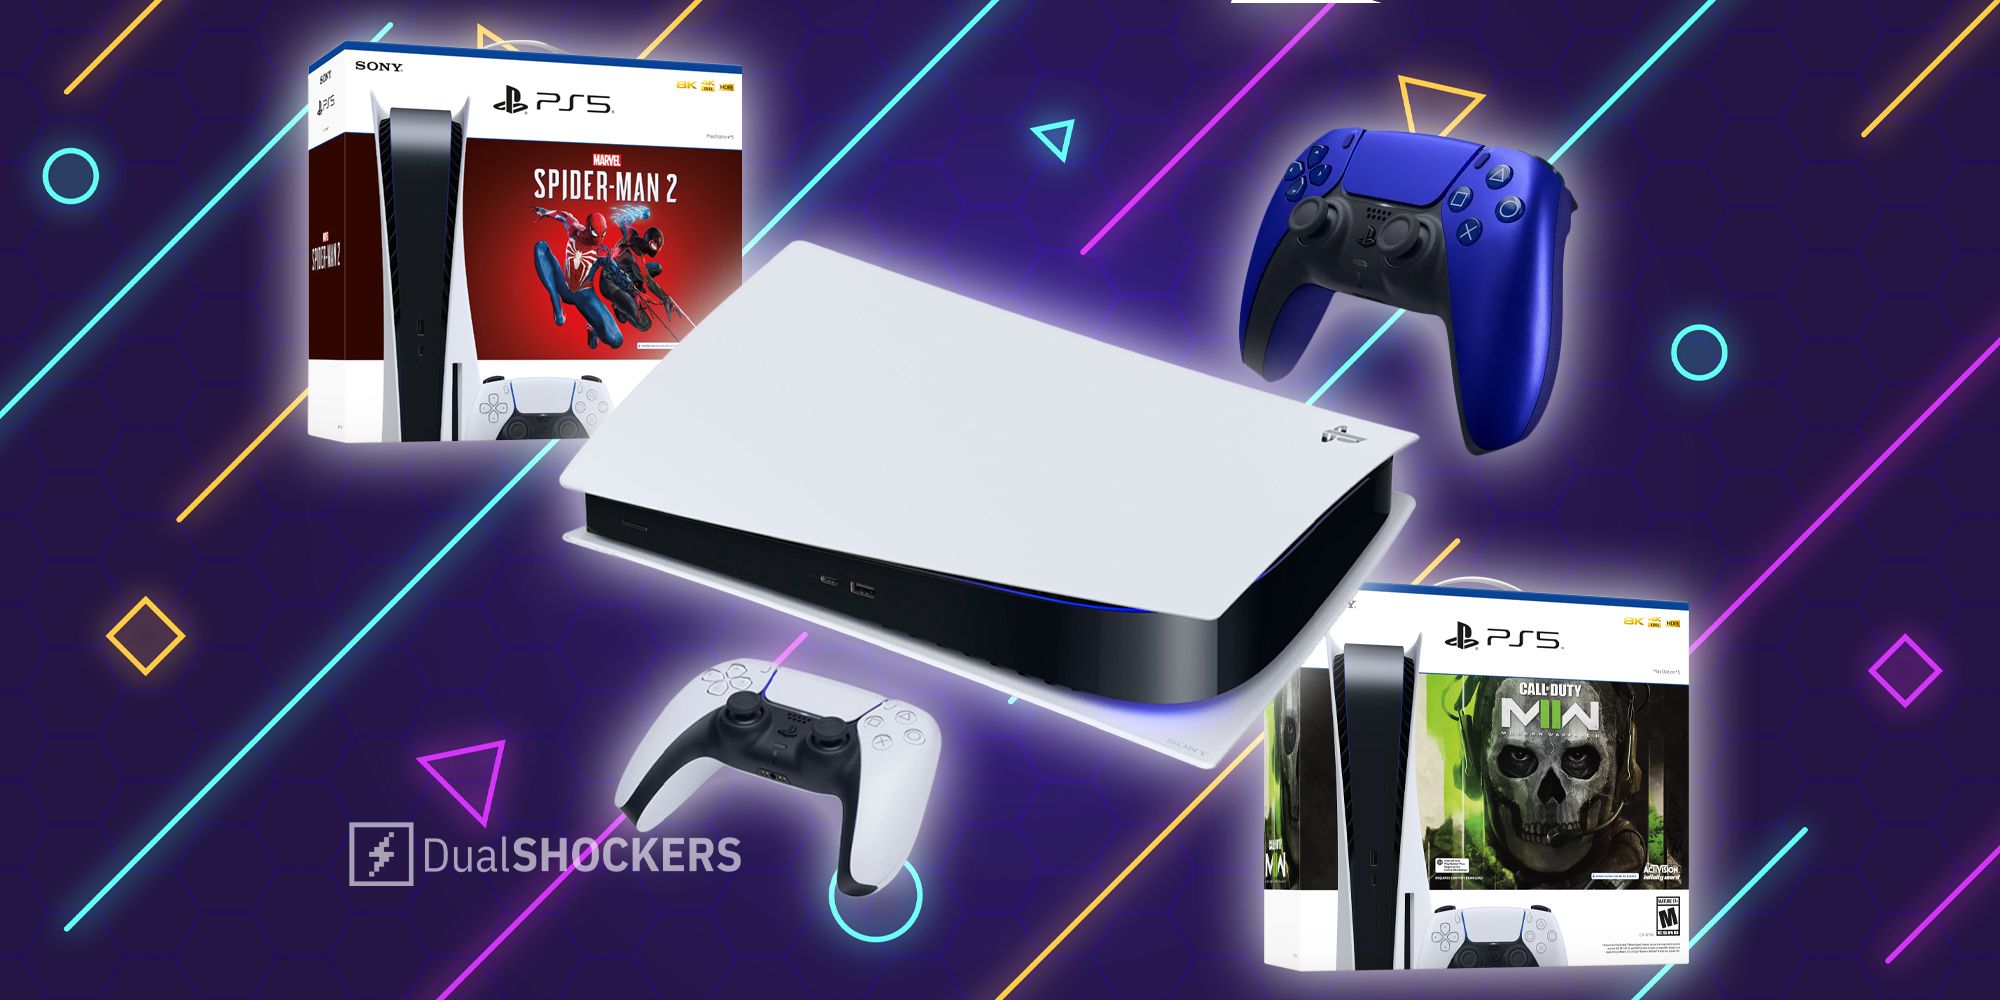 Where to Buy the PS5 Slim Spider-Man 2 and Call of Duty PS5 Black